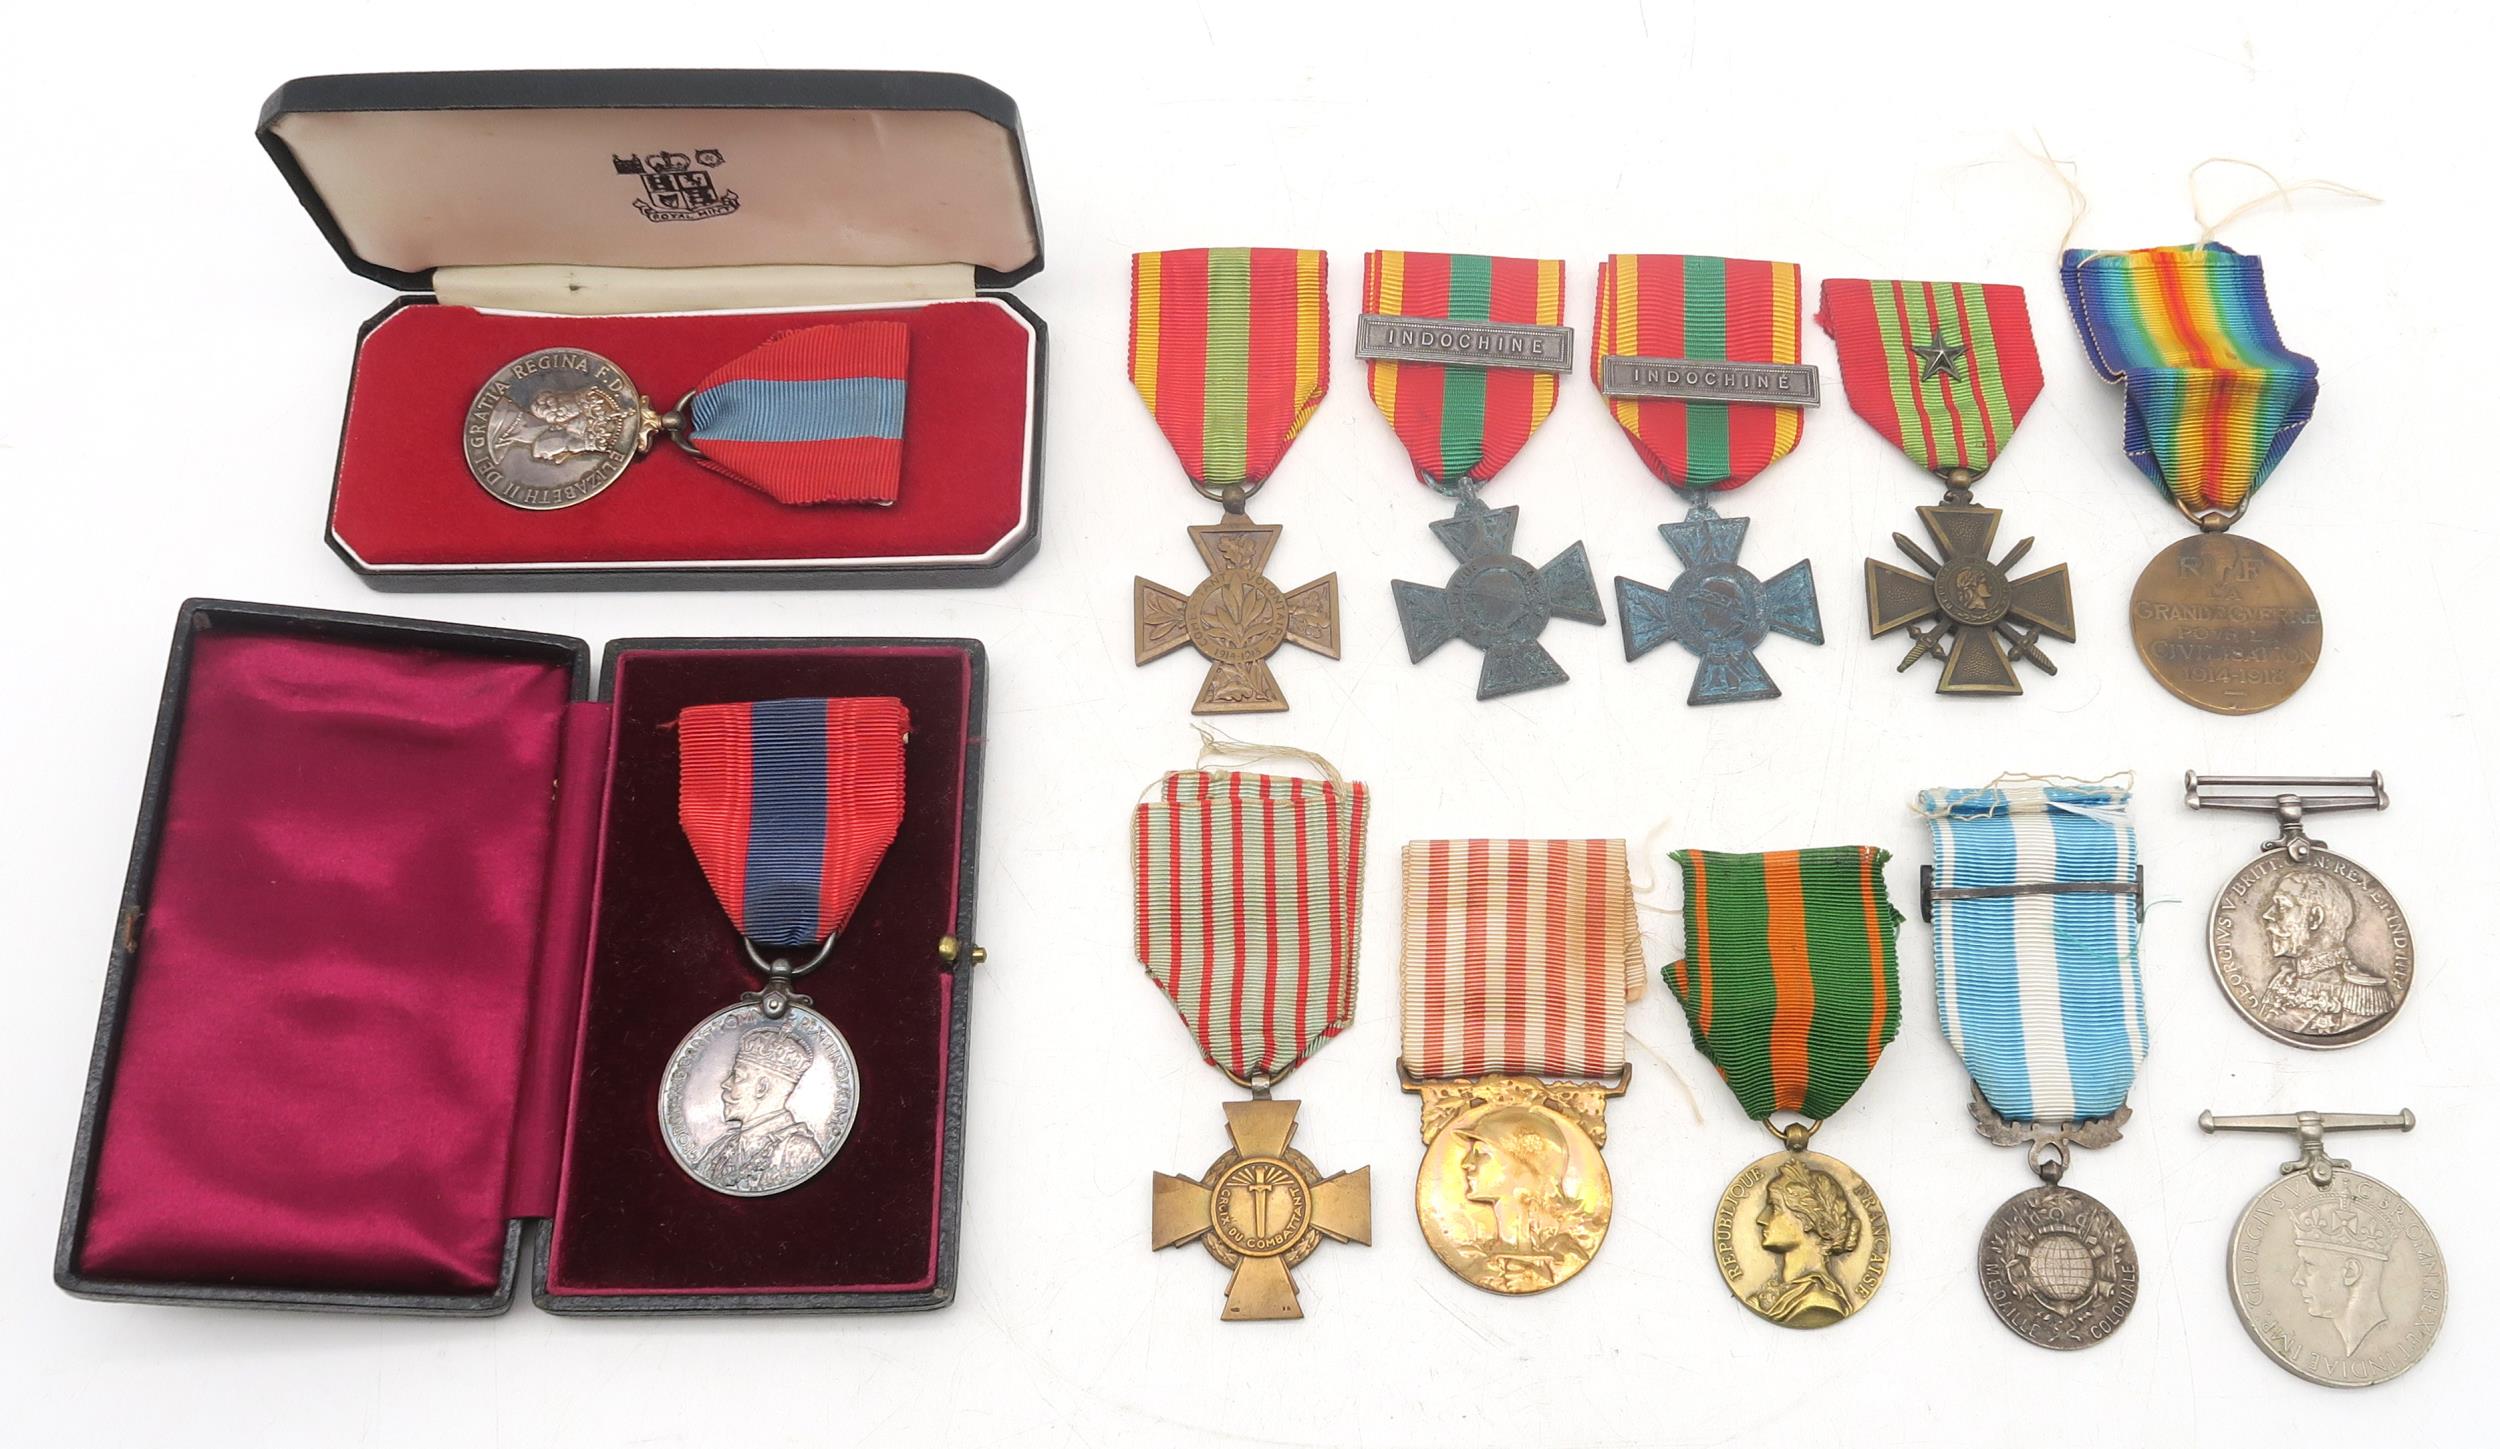 A George V Imperial Service Medal awarded to John Goldie, and an Elizabeth II example awarded to